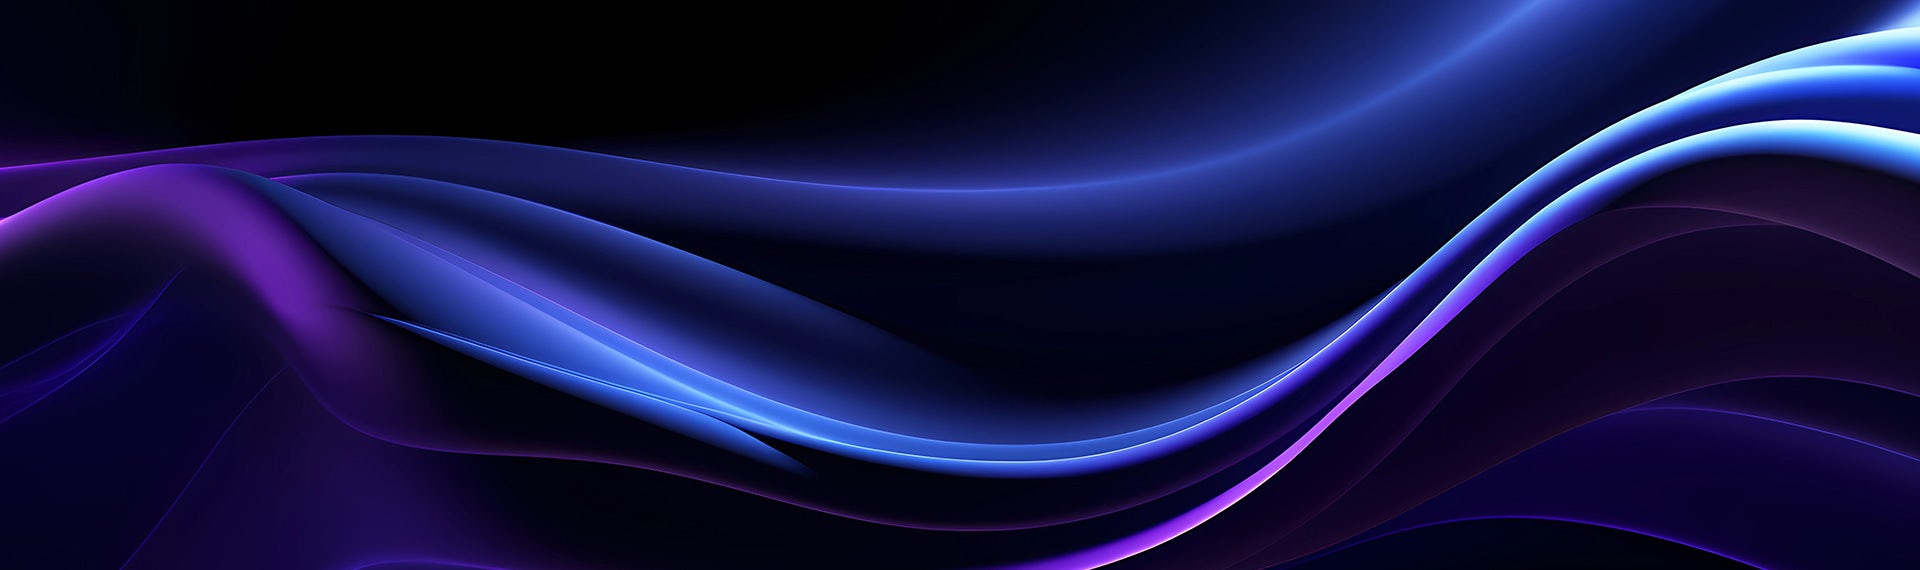 A blue and purple abstract background with wavy lines.